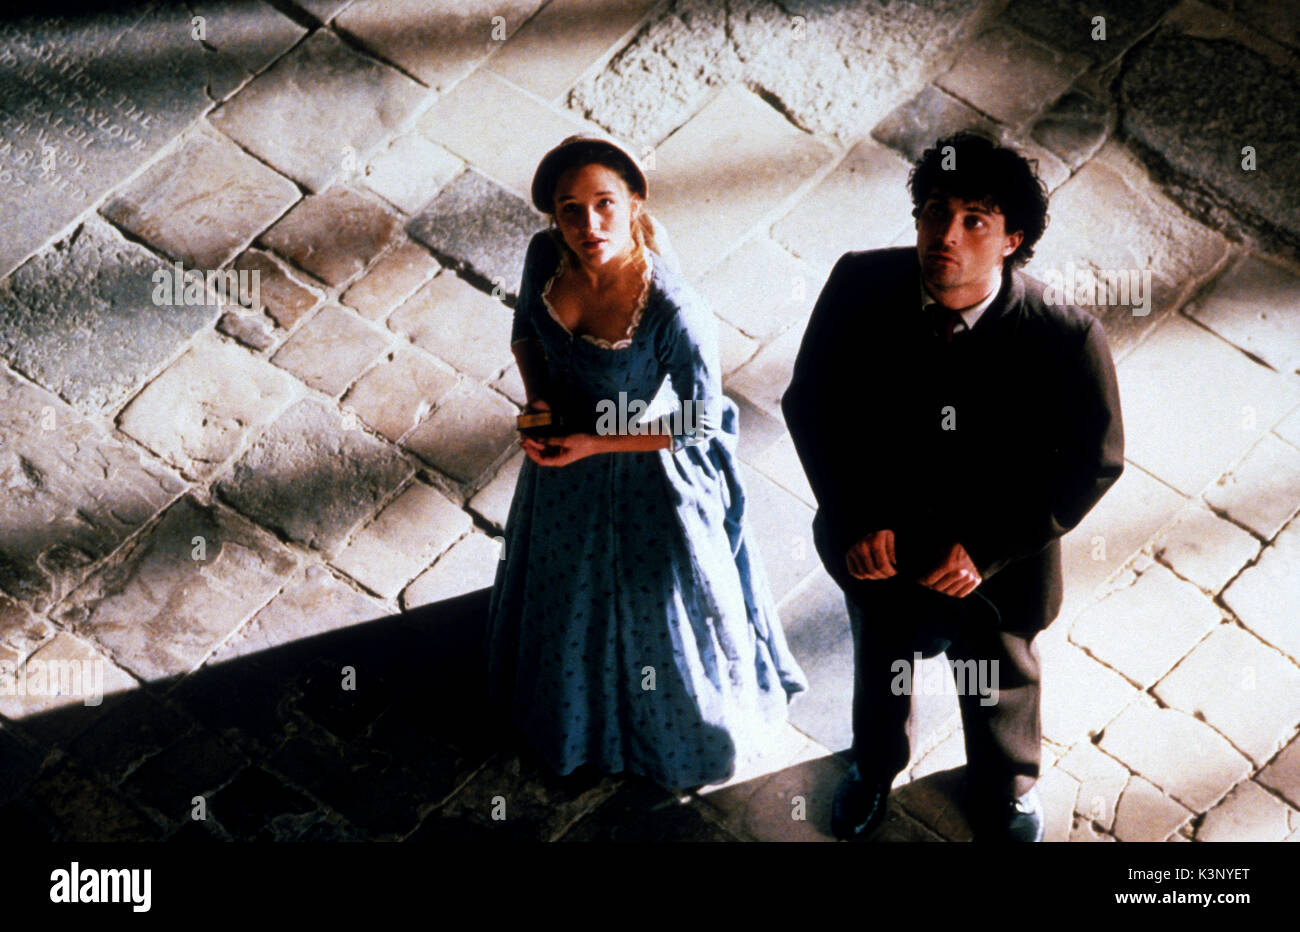 THE WOODLANDERS [BR 1997] EMILY WOOF as Grace Malbury, RUFUS SEWELL as Giles Winterbourne     Date: 1997 Stock Photo